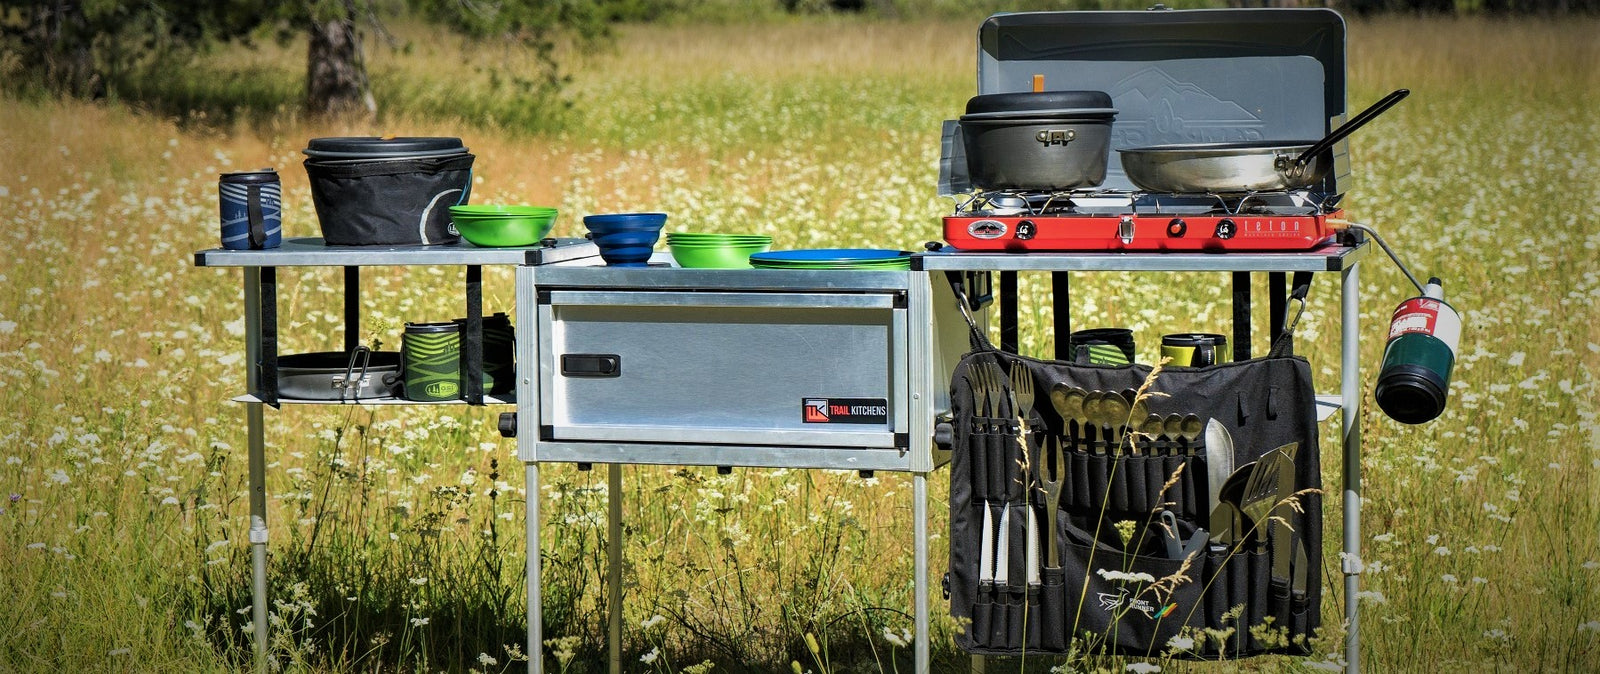 How to Set Up a Portable Camping Kitchen Box Today